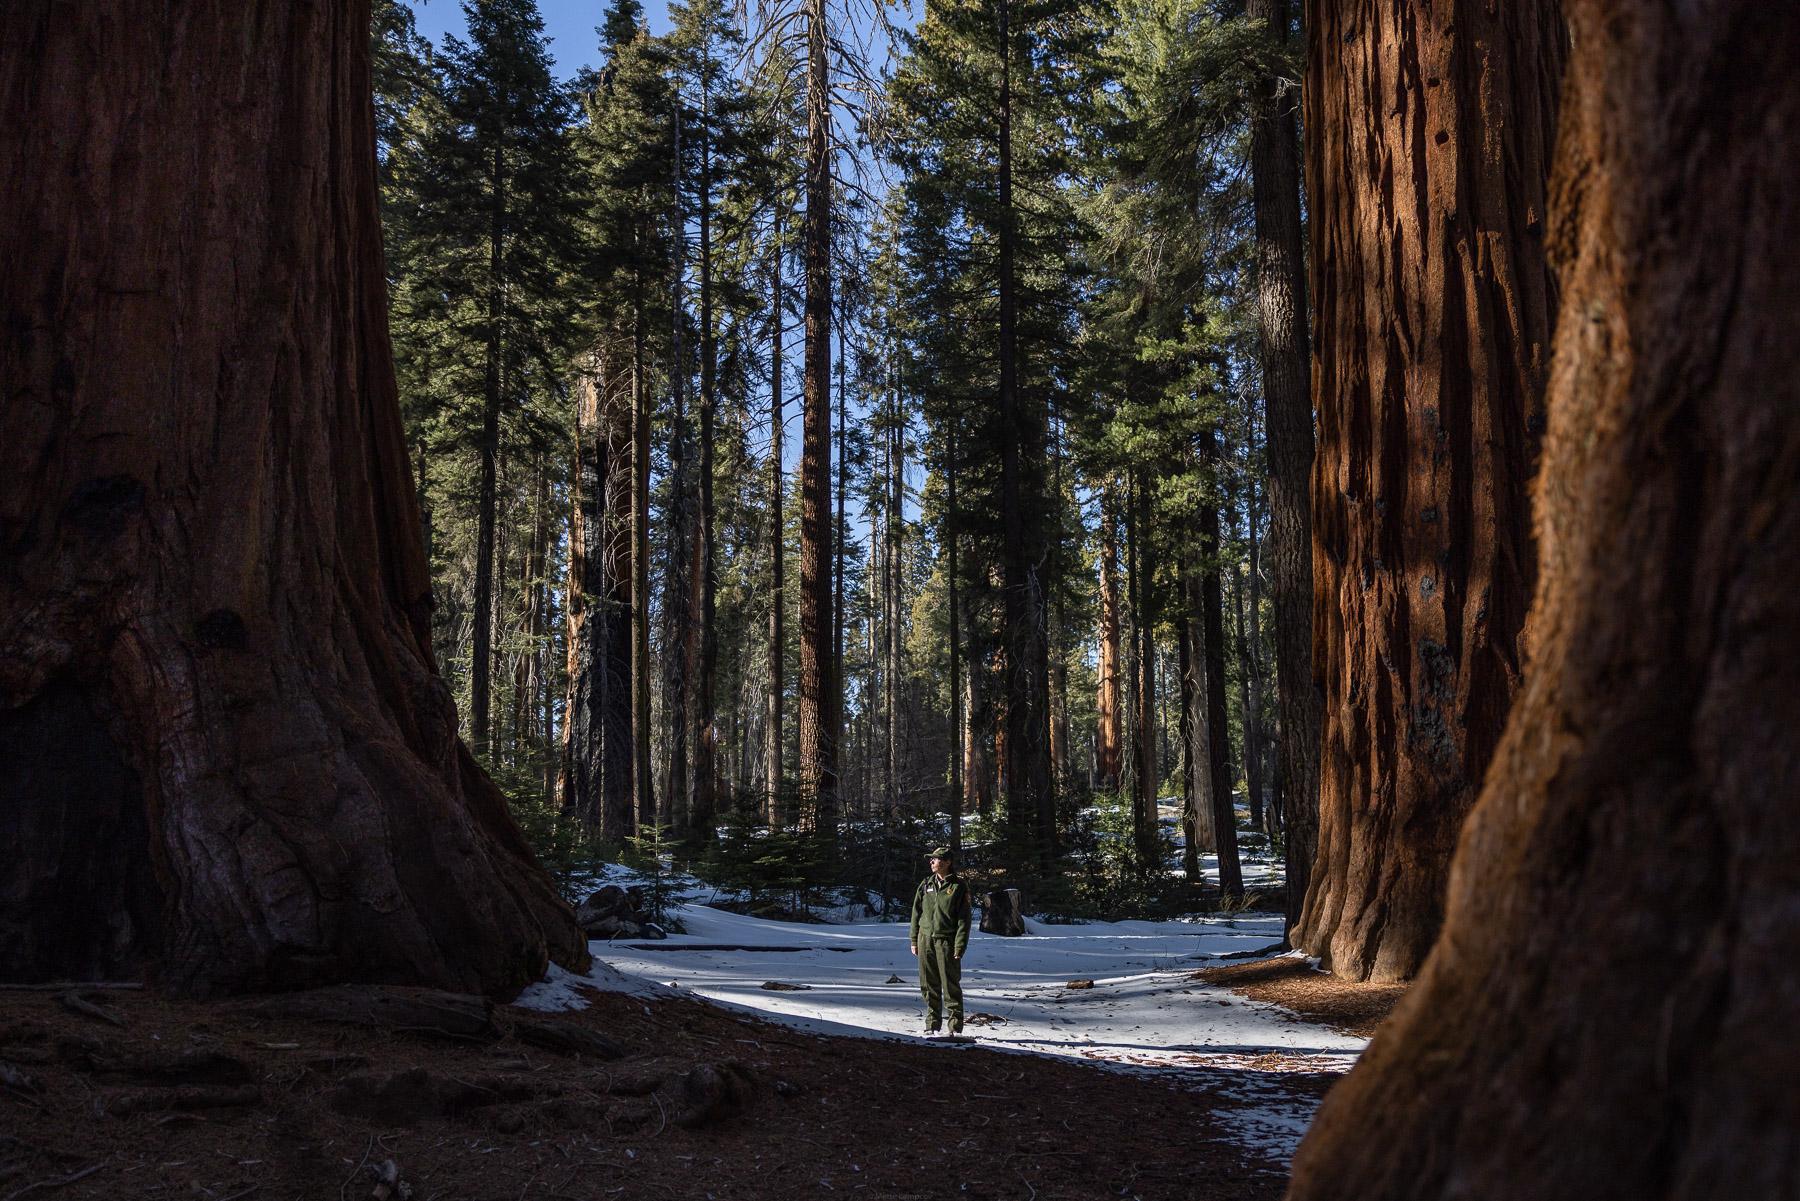 - Sequoia, a year in a burning forest - Christy Bingham lead scientist at Sequoia and Kings...